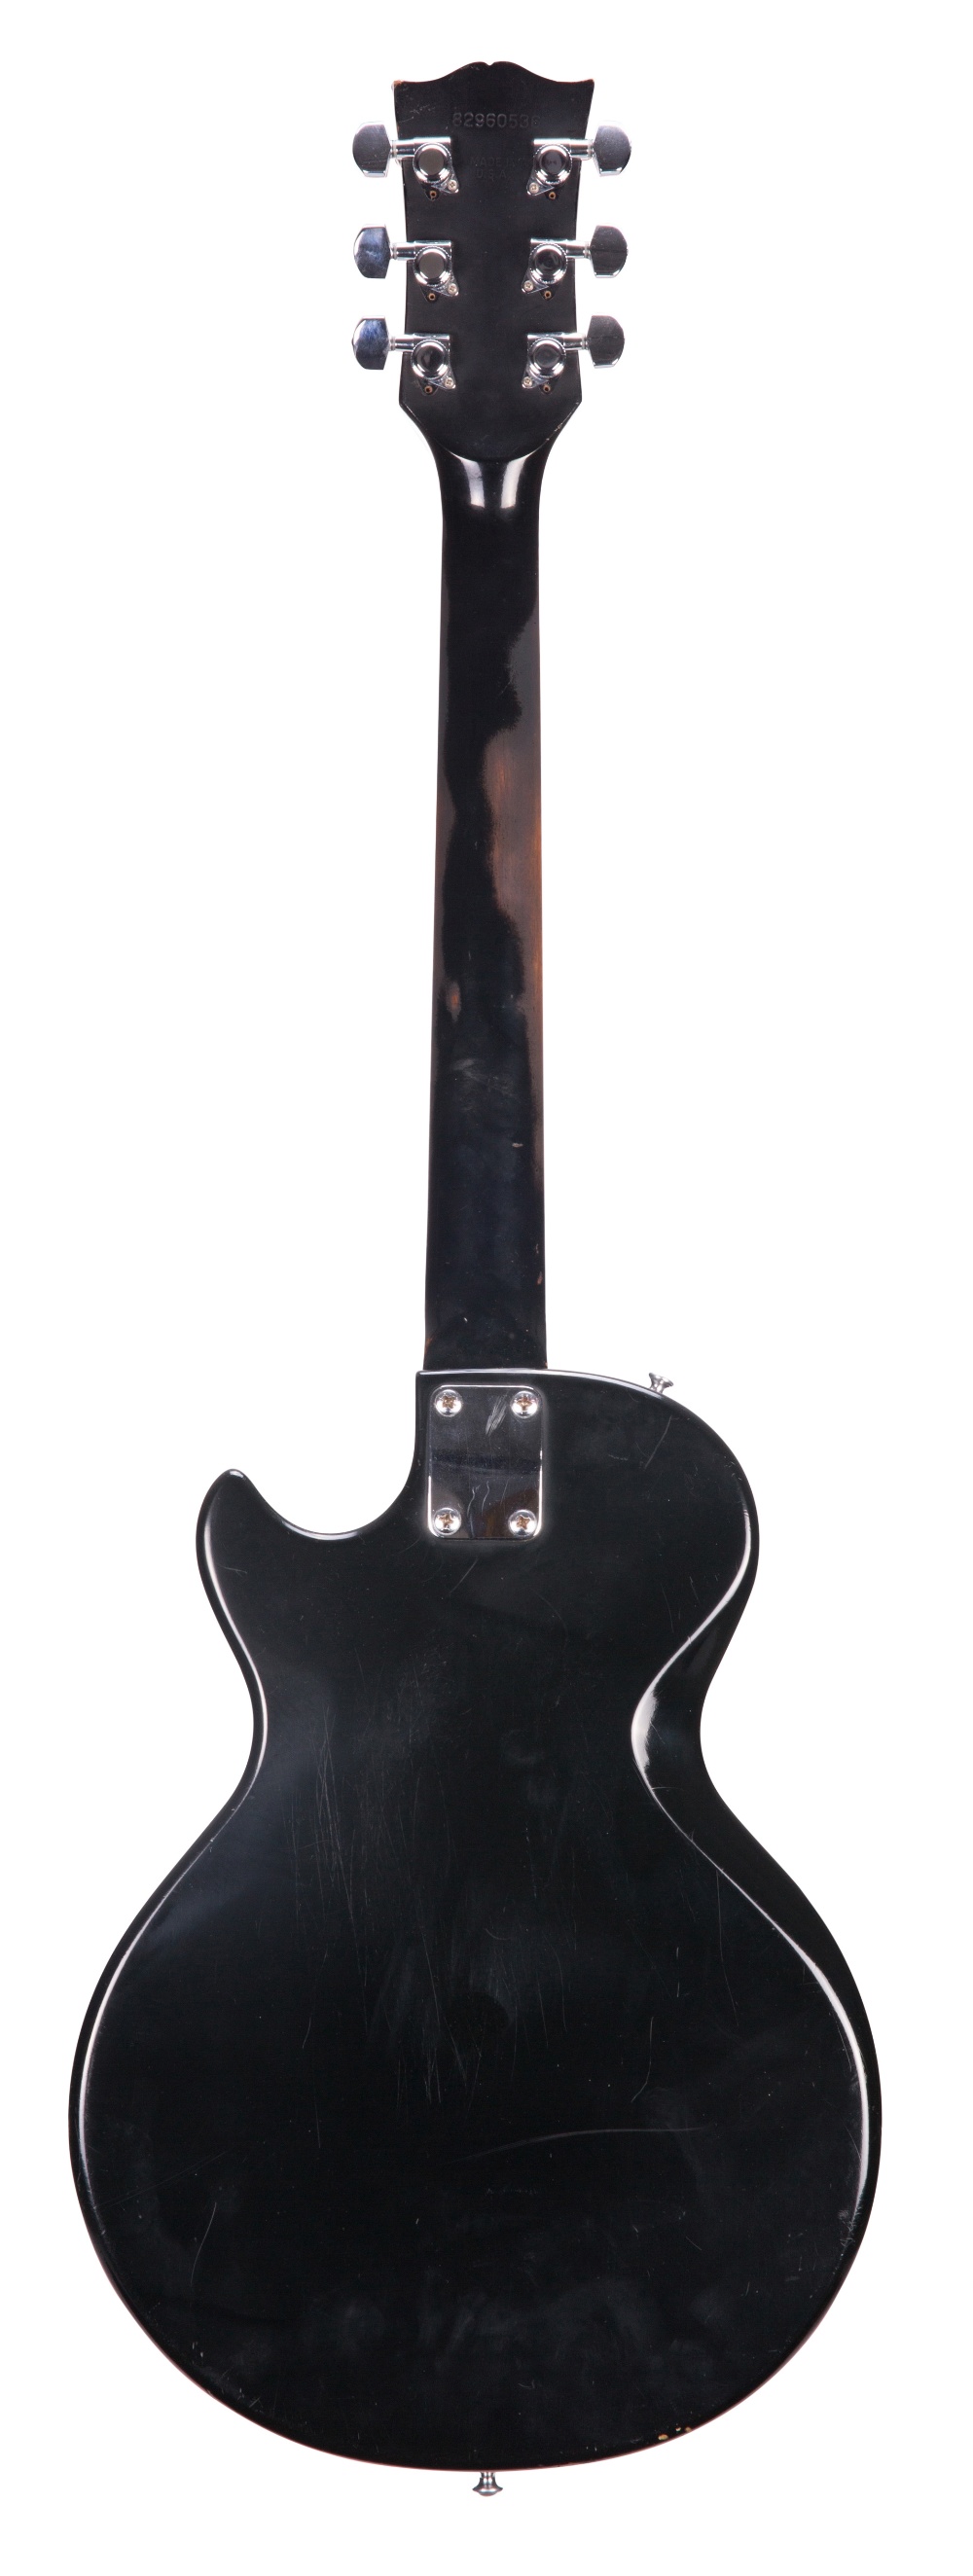 1980 Gibson Sonex-180 Deluxe electric guitar, made in USA, ser. no. 8xxx0xx6; Finish: black, surface - Image 2 of 2